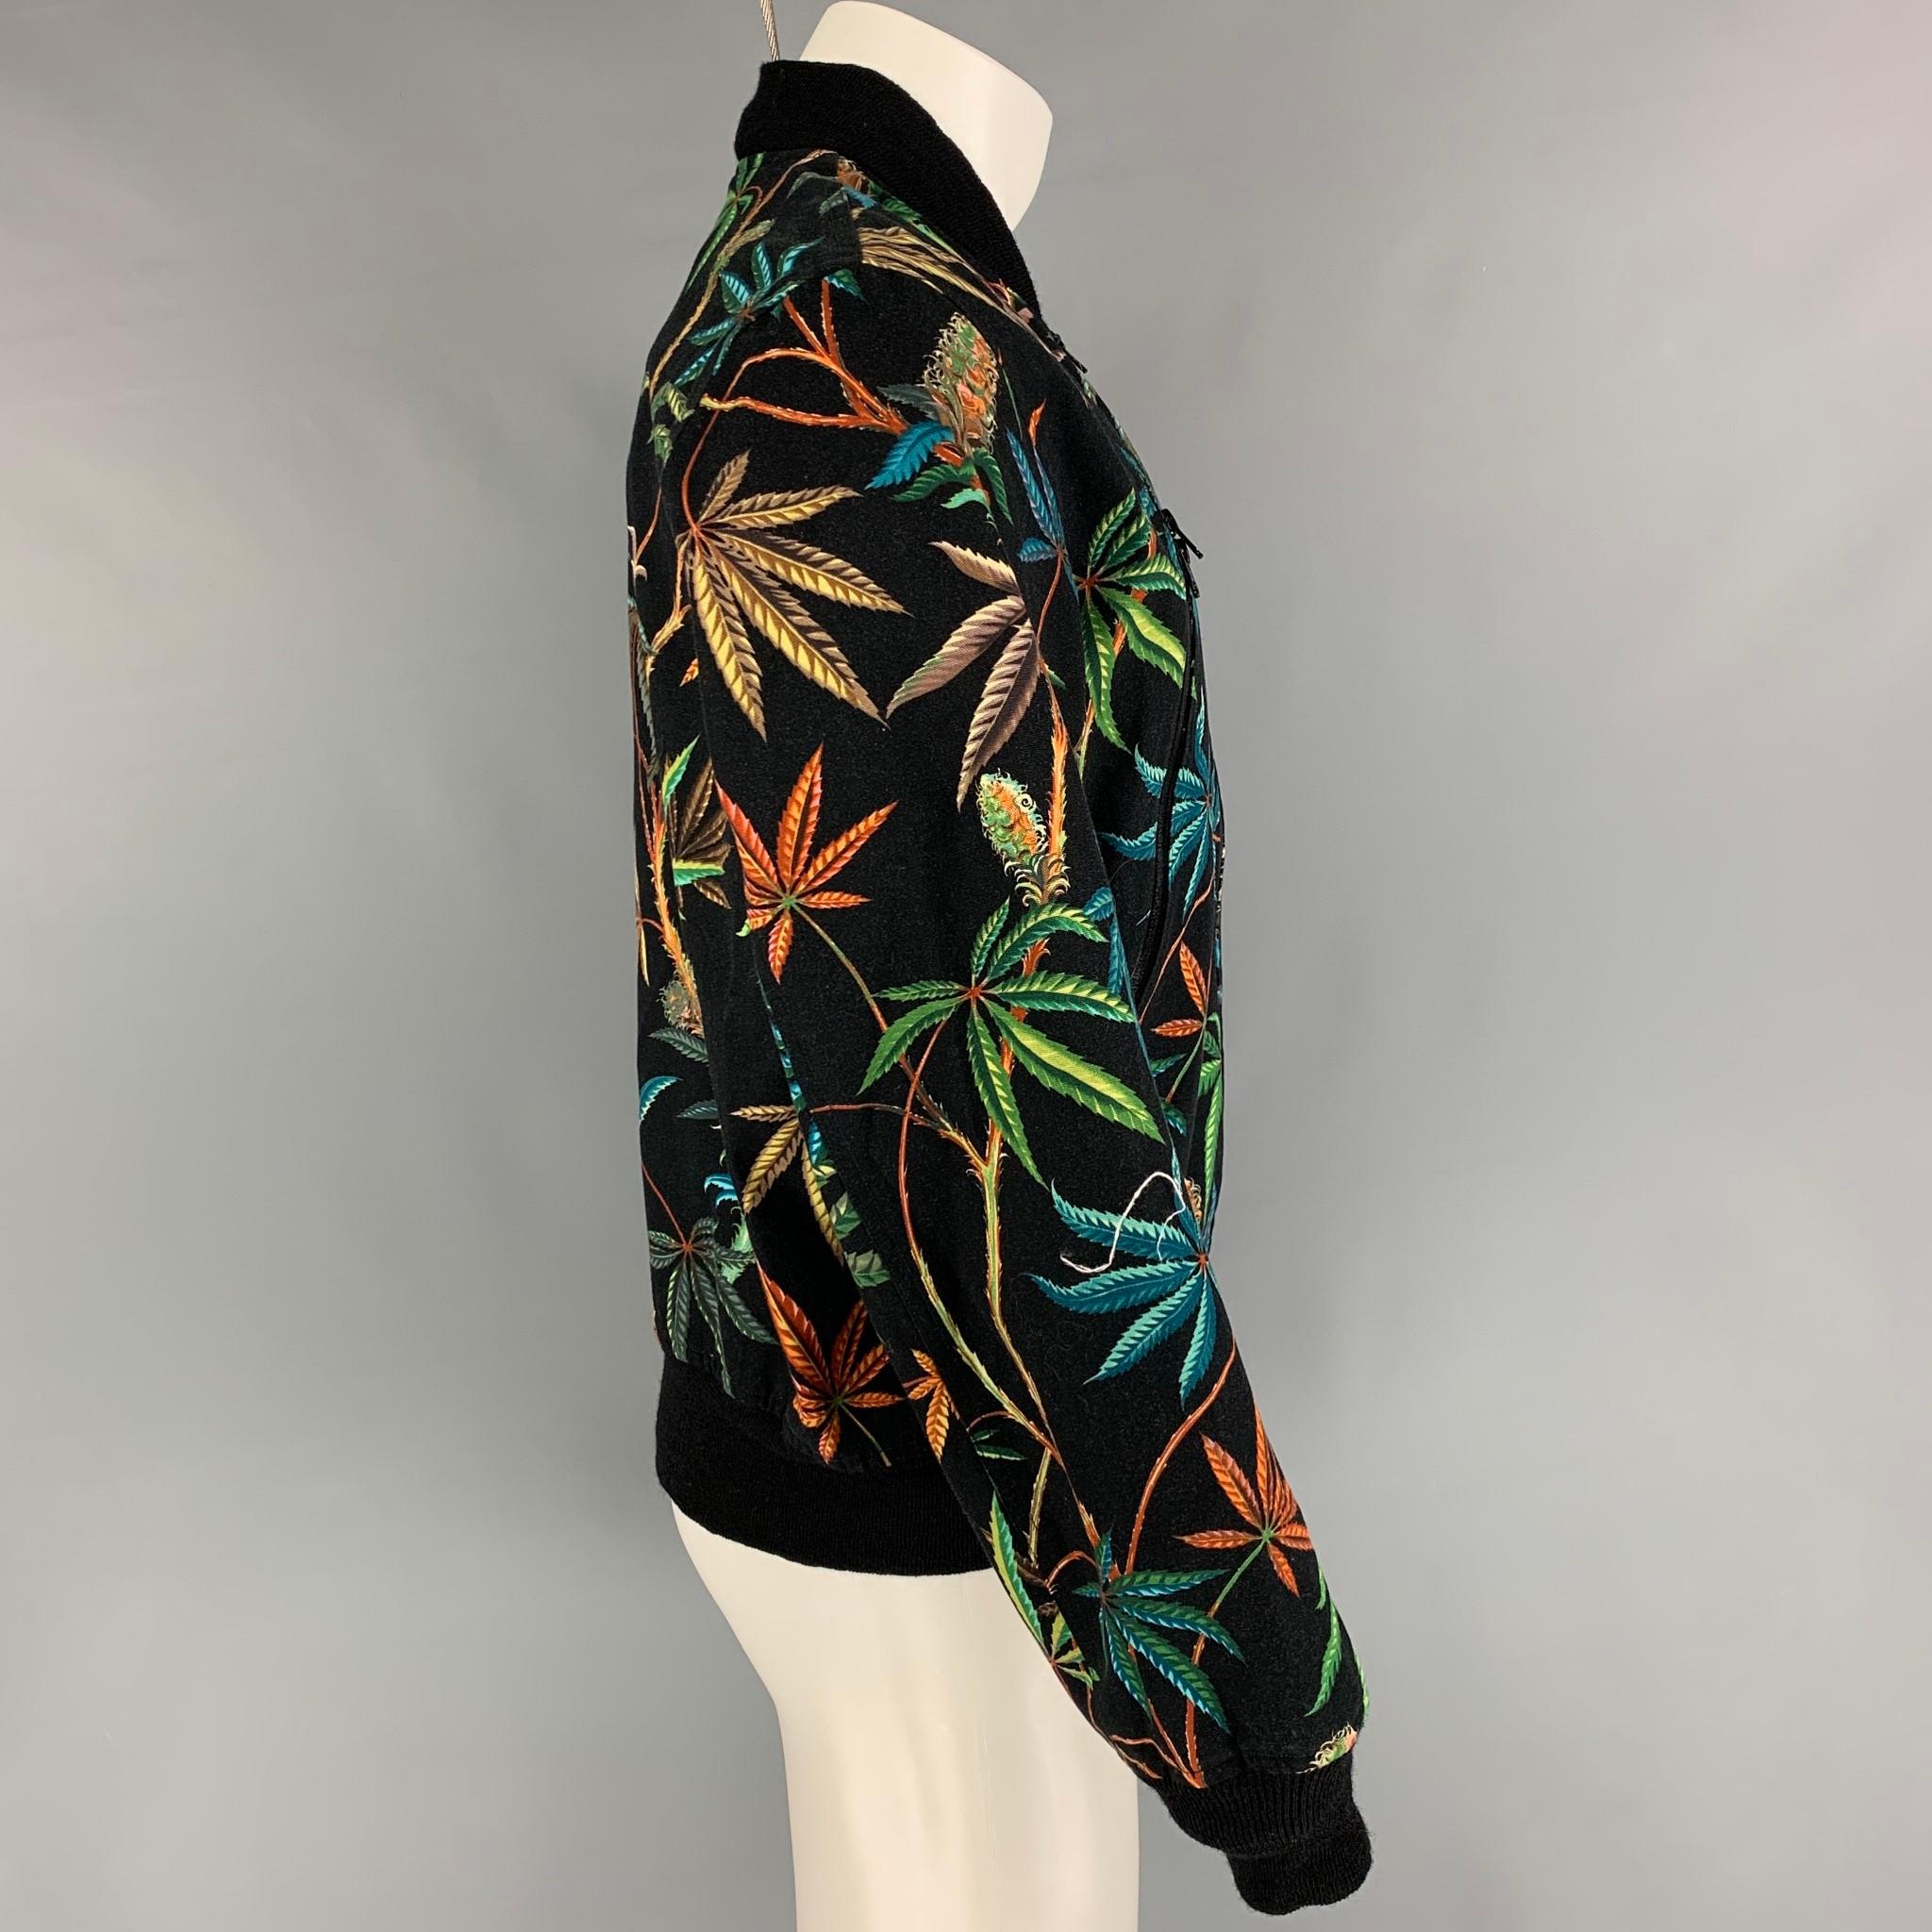 MONITALY jacket comes in a multi-color print cotton featuring a bomber style, ribbed hem, front zipper pockets, and a full zip up closure. Made in USA. 

New With Tags. 
Marked: 40
Original Retail Price: $450.00

Measurements:

Shoulder: 18